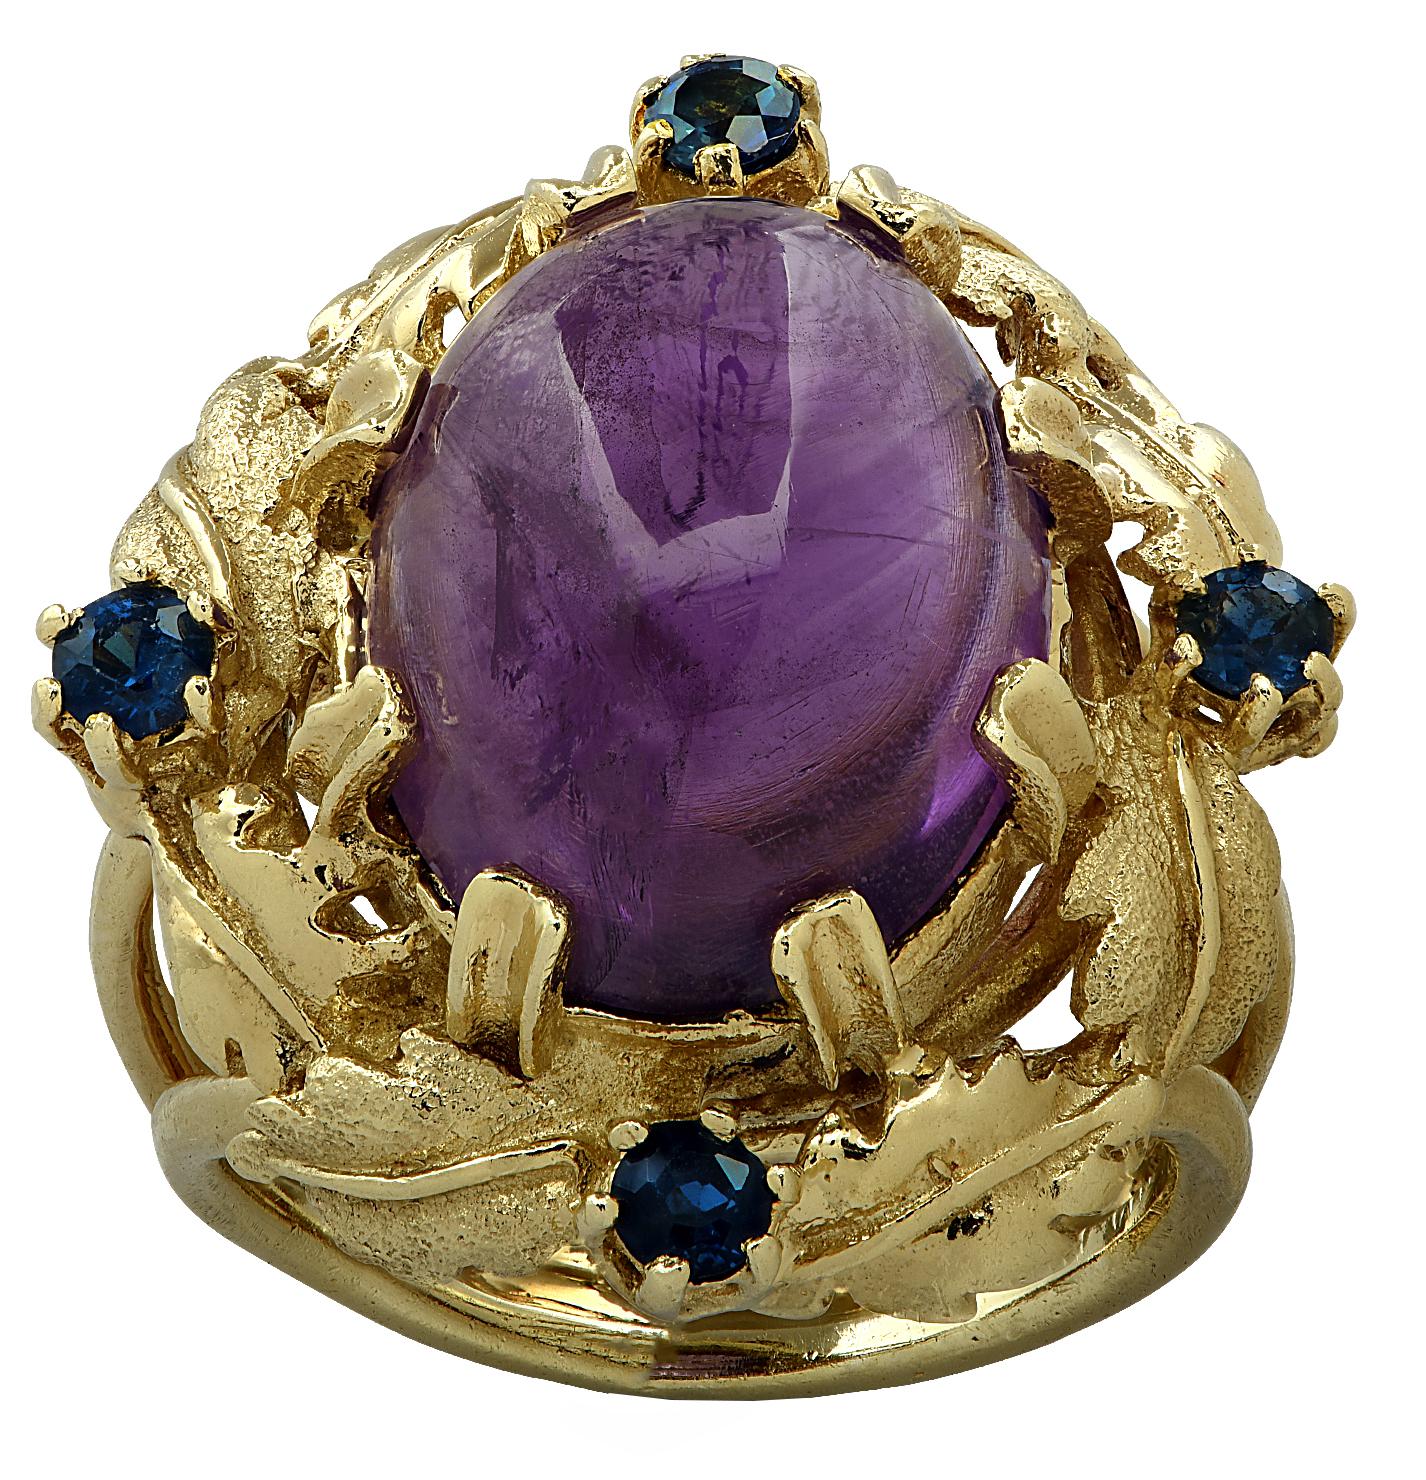 Stunning cocktail ring crafted in 18 karat yellow gold showcasing a spectacular oval Amethyst cabochon weighing approximately 8.5 carats, resting on a bed of gold leaves, adorned with 4 round sapphires weighing approximately .25 carats total.  The